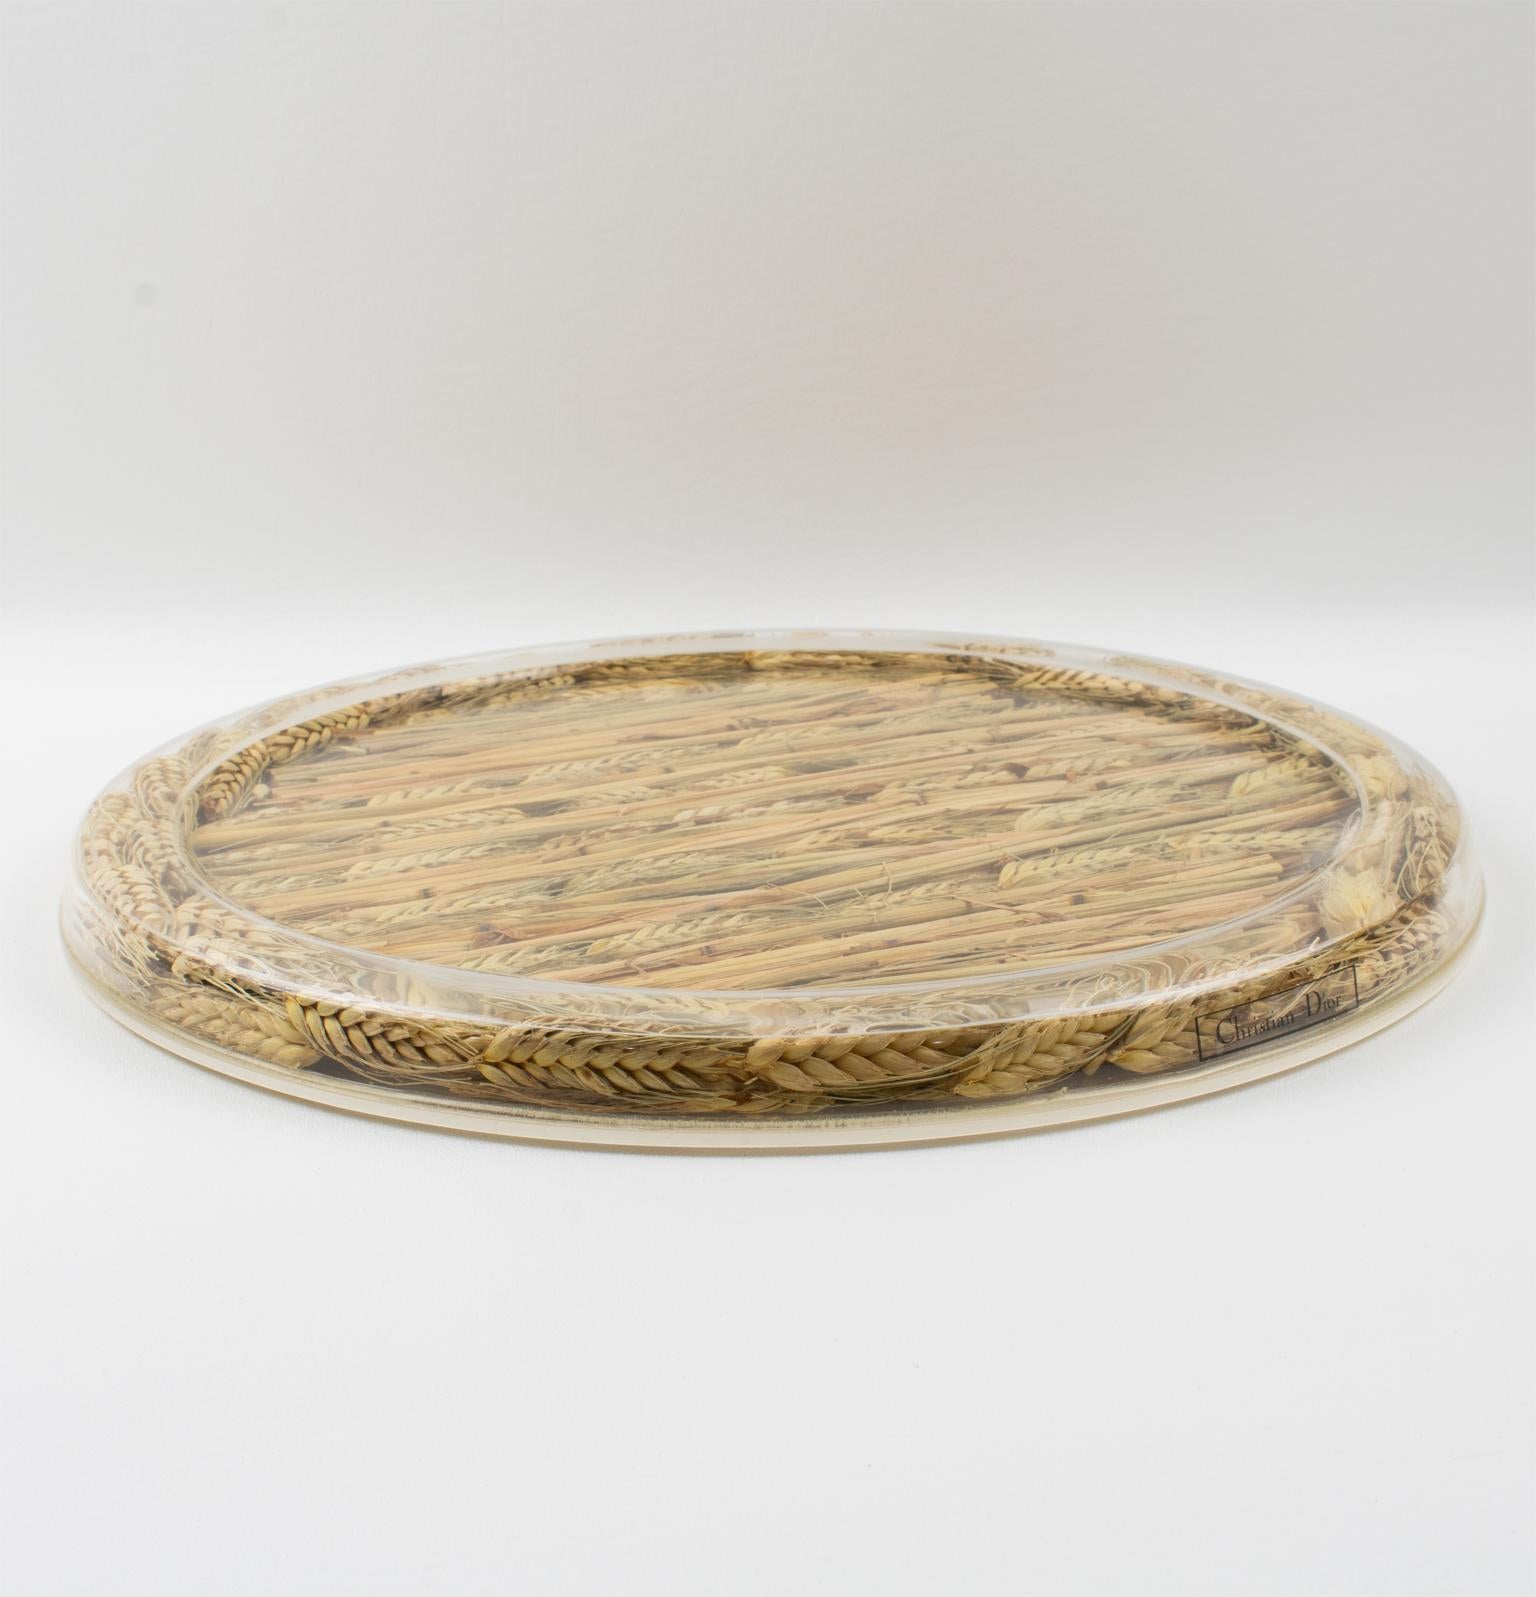 Christian Dior Home Collection Tray Board Platter Lucite and Wheat, 1970s In Excellent Condition For Sale In Atlanta, GA